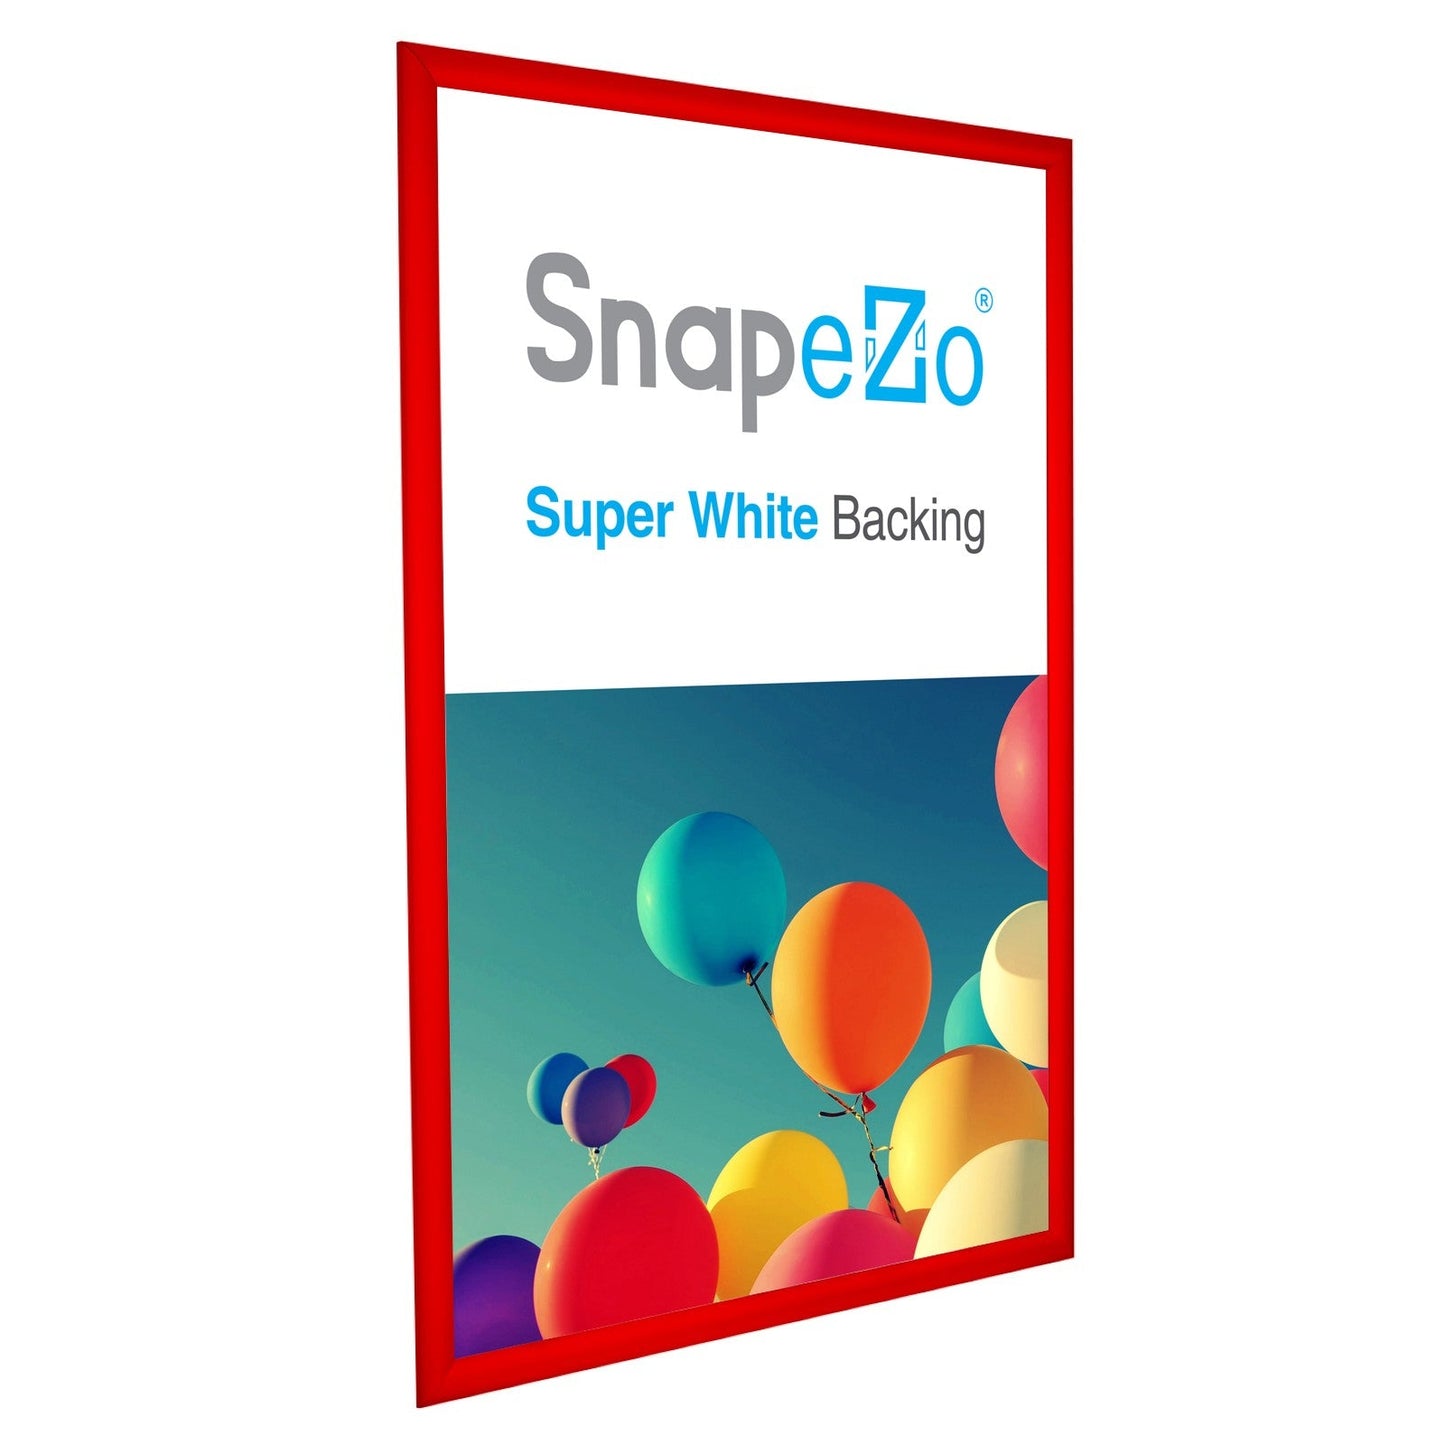 Load image into Gallery viewer, 21x31 Red SnapeZo® Snap Frame - 1.2&amp;quot; Profile
